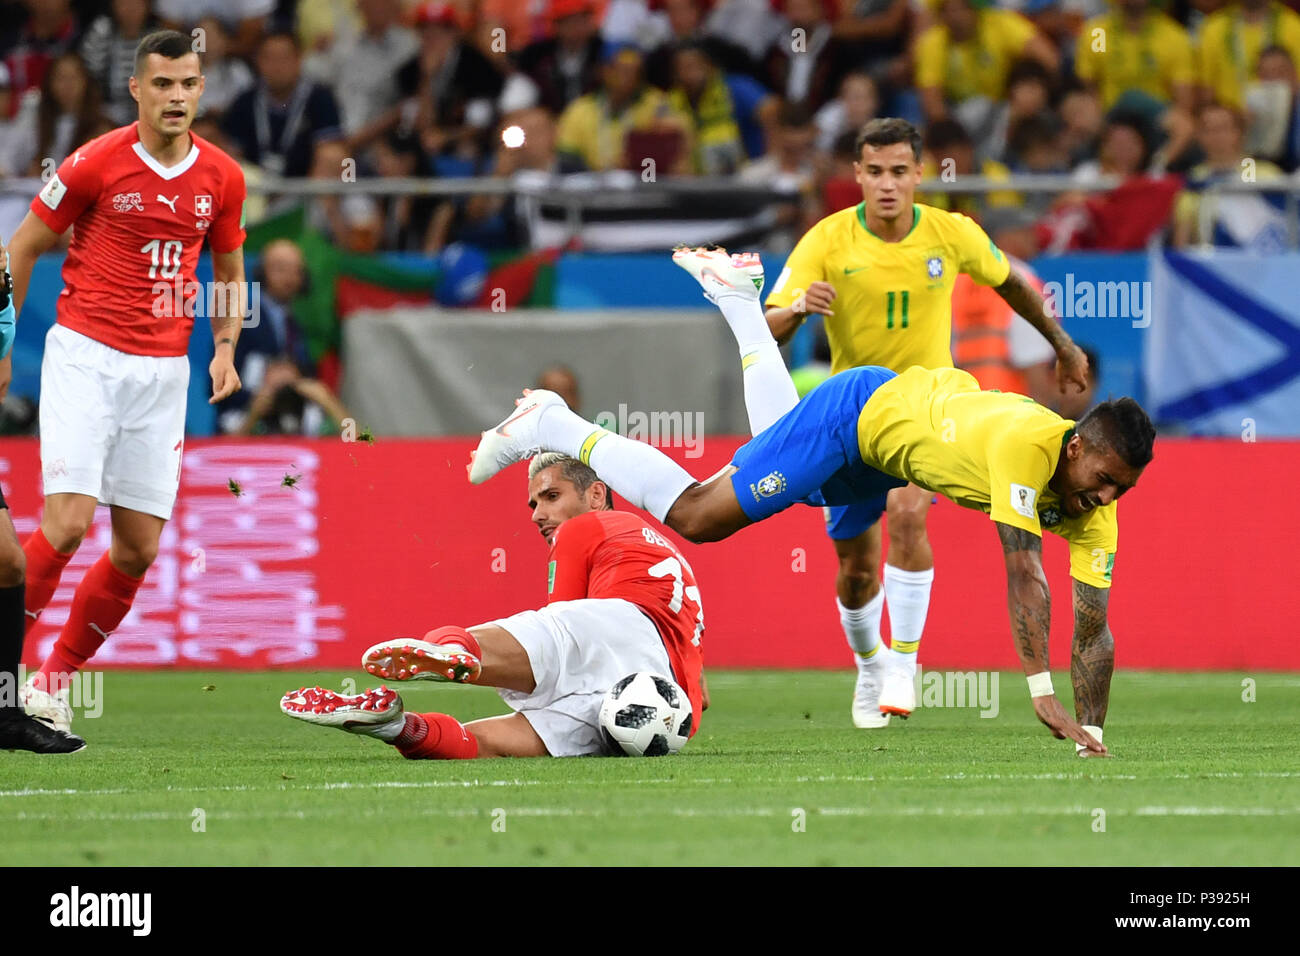 Rostov On Don, Russland. 17th June, 2018. Valon BEHRAMI (SUI), action, duels, foul on PAULINHO (BRA). Brazil (BRA) -Switzerland (SUI) 1-1, Preliminary Round, Group E, match 09, on 17.06.2018 in Rostov-on-Don, Rostov Arena. Football World Cup 2018 in Russia from 14.06. - 15.07.2018. | usage worldwide Credit: dpa/Alamy Live News Stock Photo